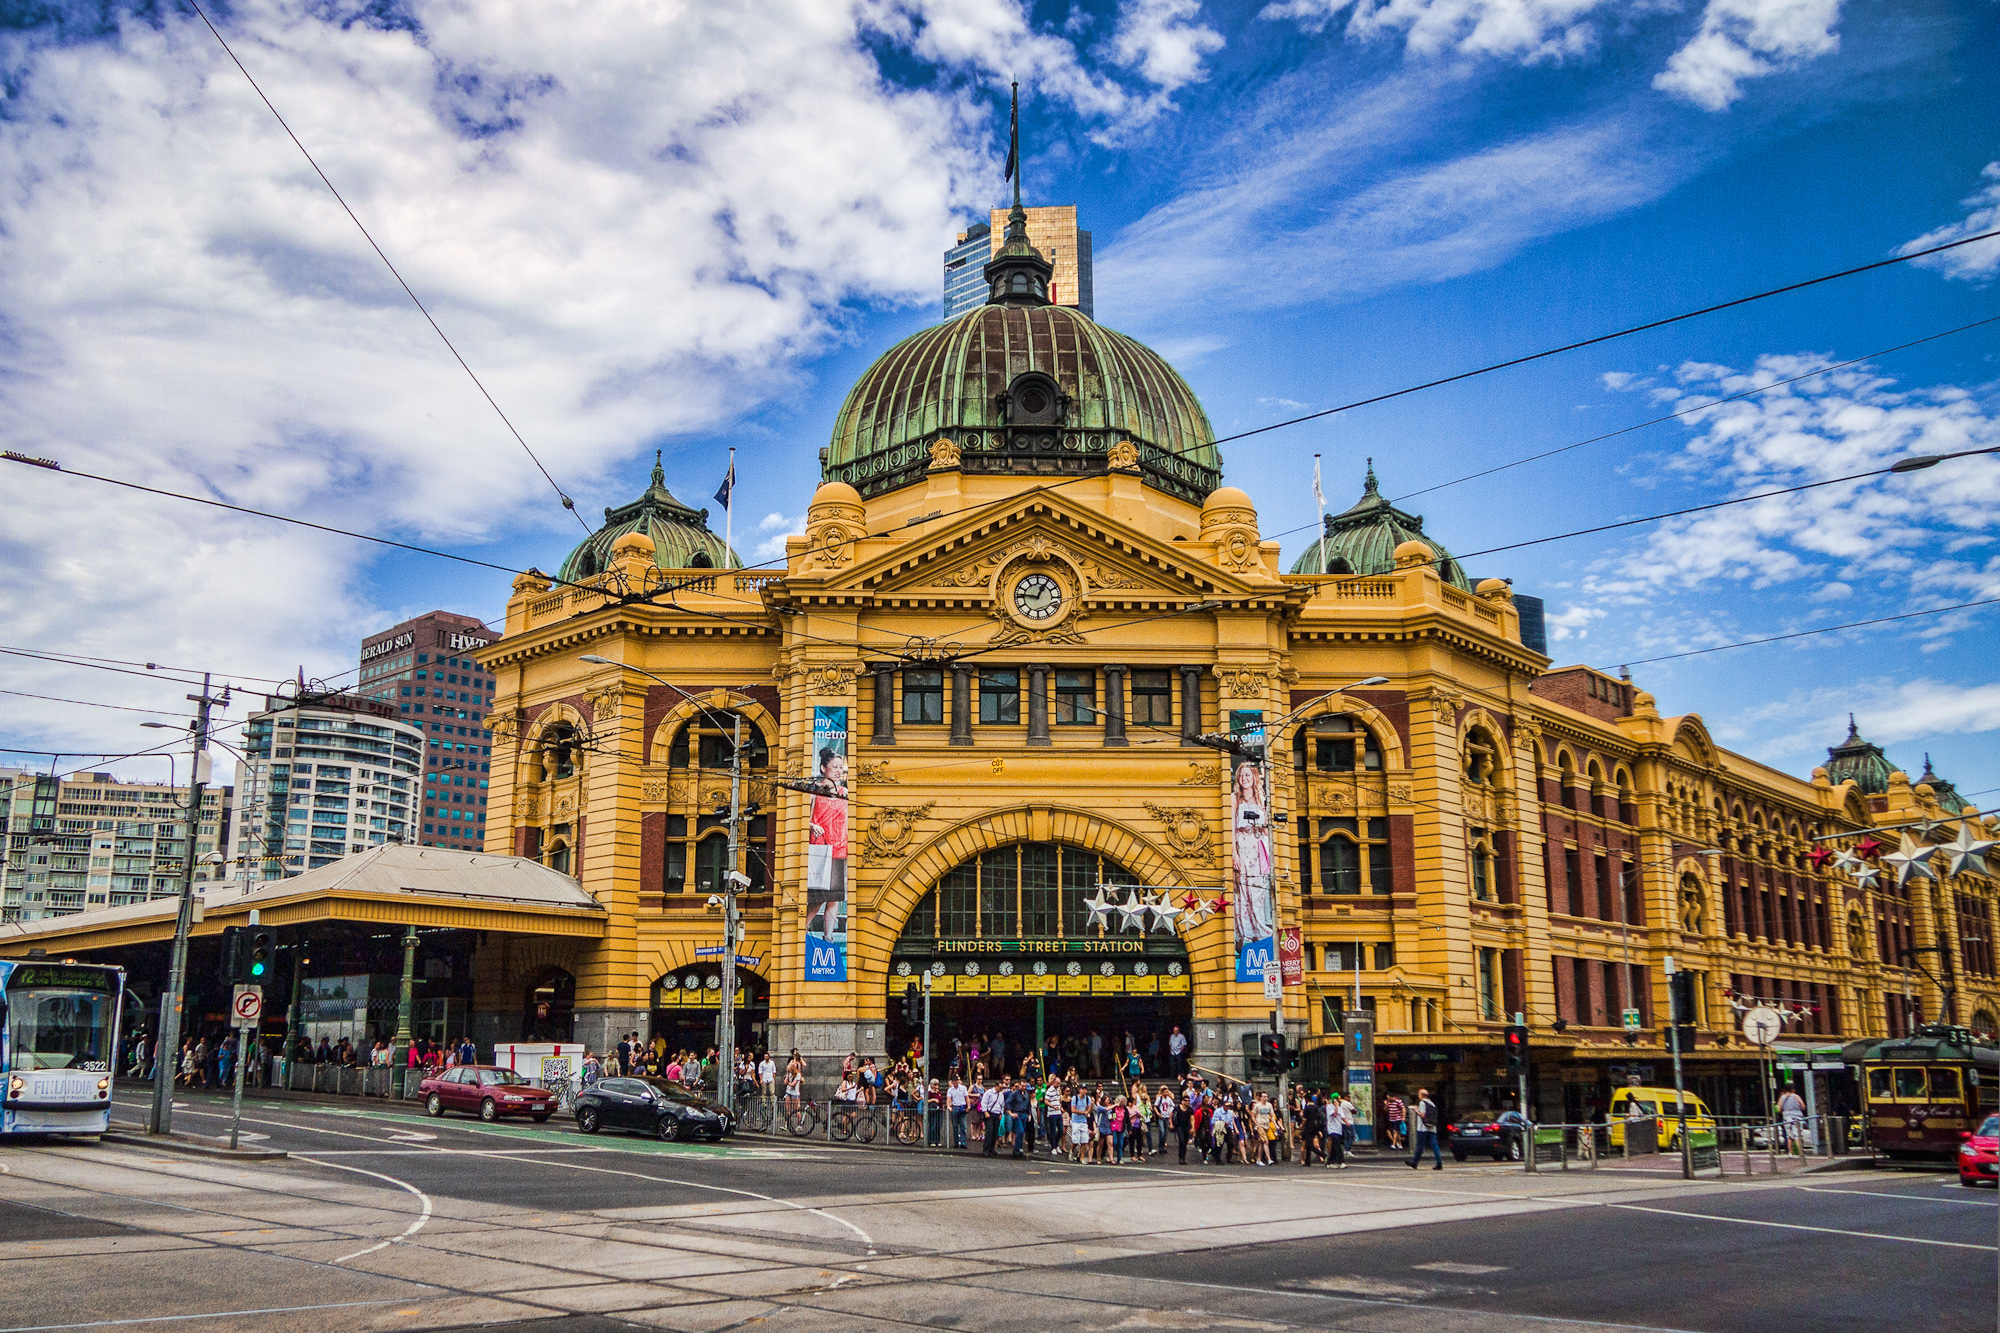 Flinders Street Station in Melbourne. Designed by James Fawcett and H. P. C. Ashworth in 1899, over 110,000 commuters and 1,500 trains pass through the station every weekday.